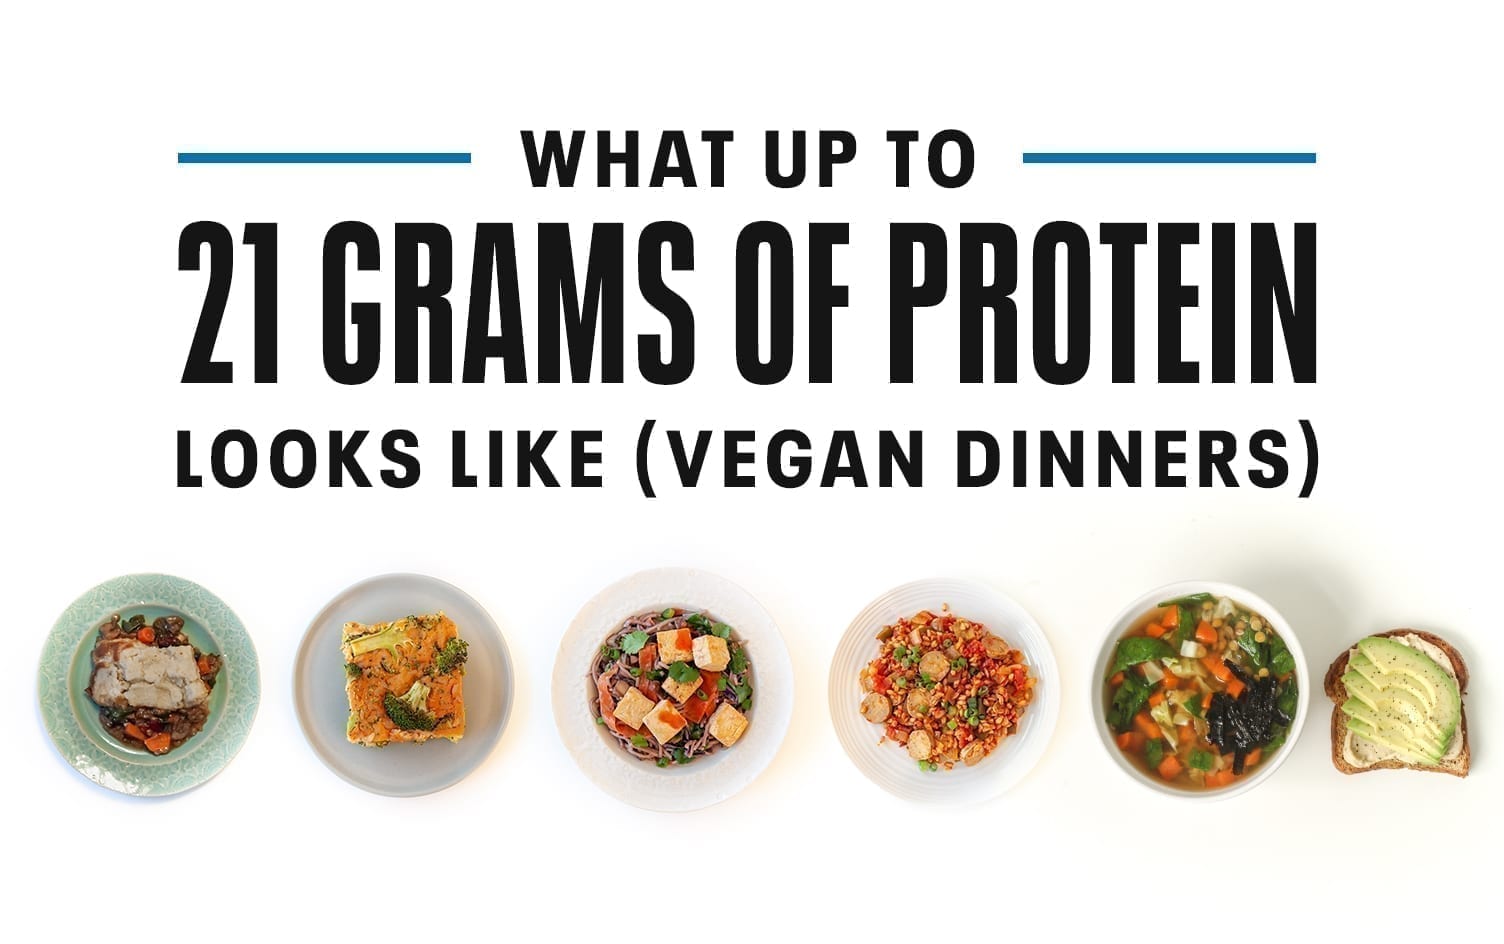 What up to 21 Grams of Protein Looks Like (Vegan Dinners)